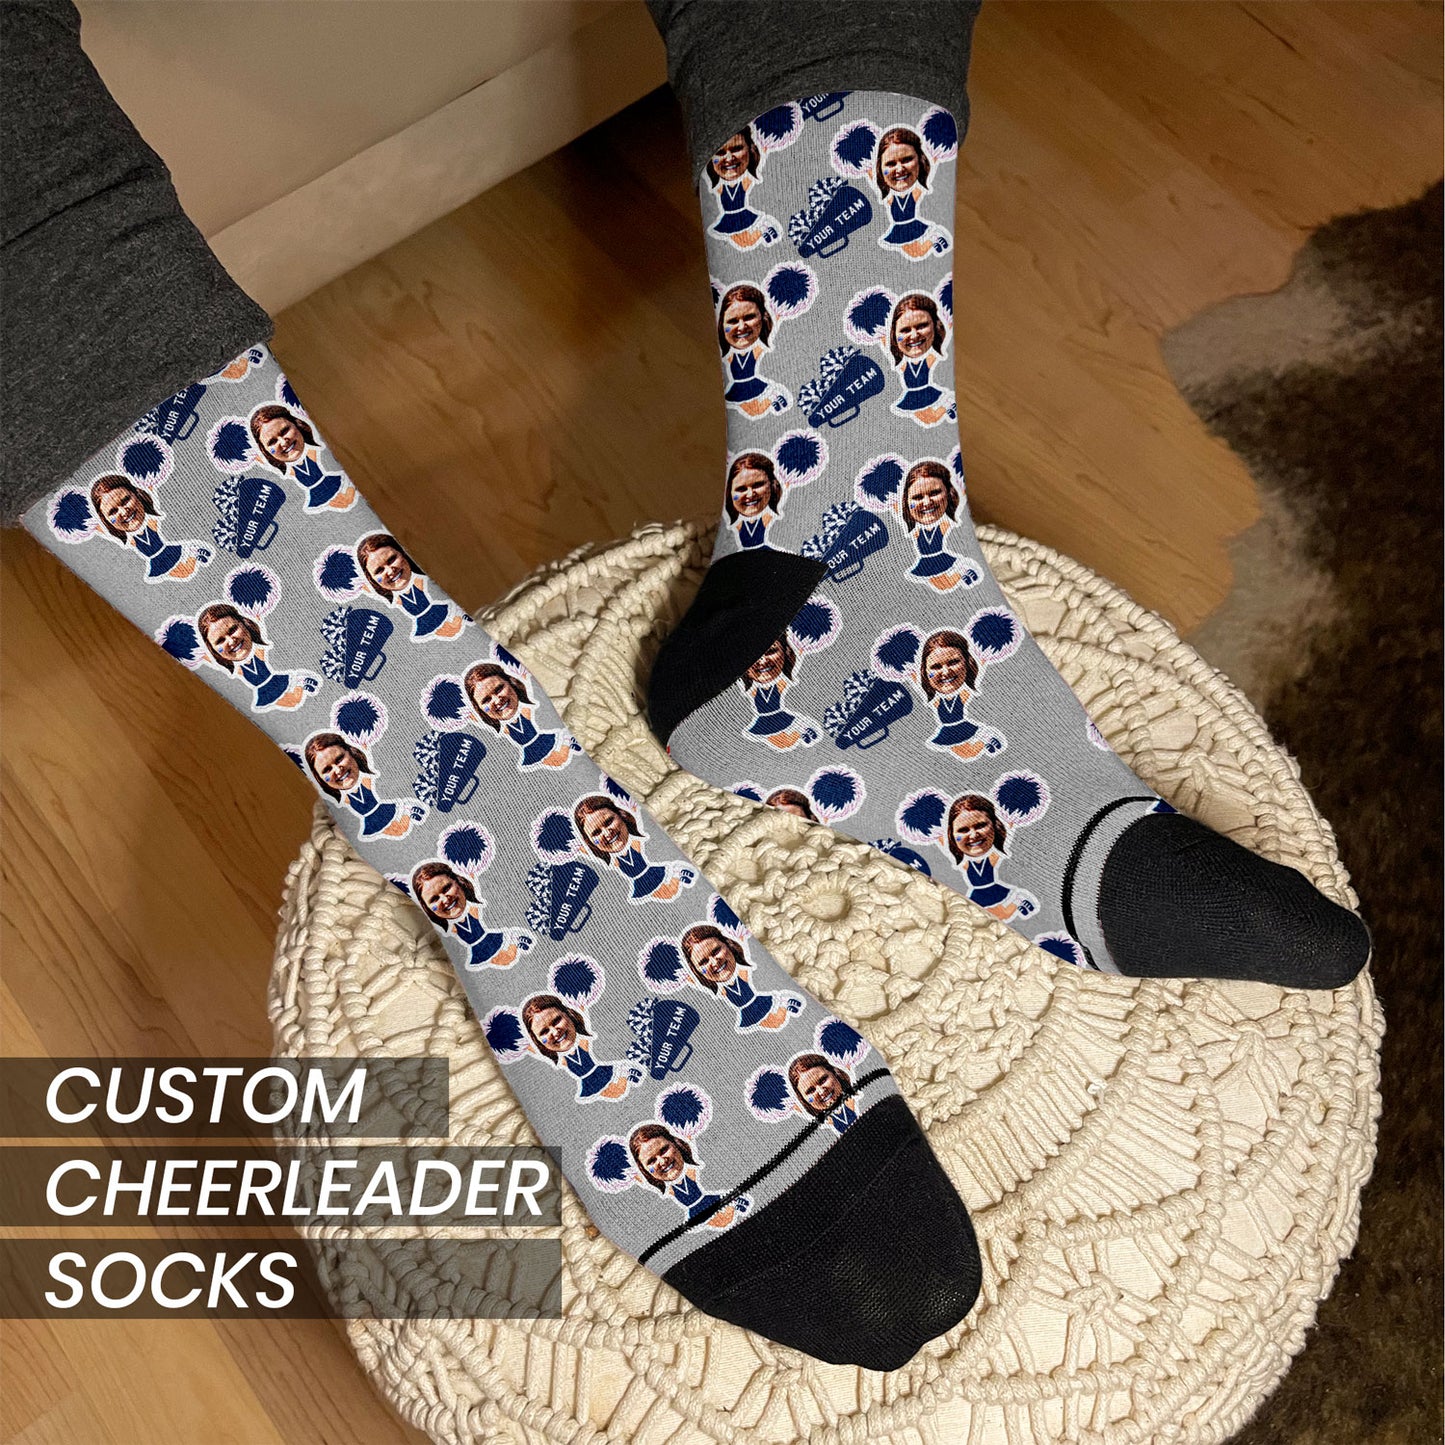 Personalized cheerleader gift socks with faces on man's feet